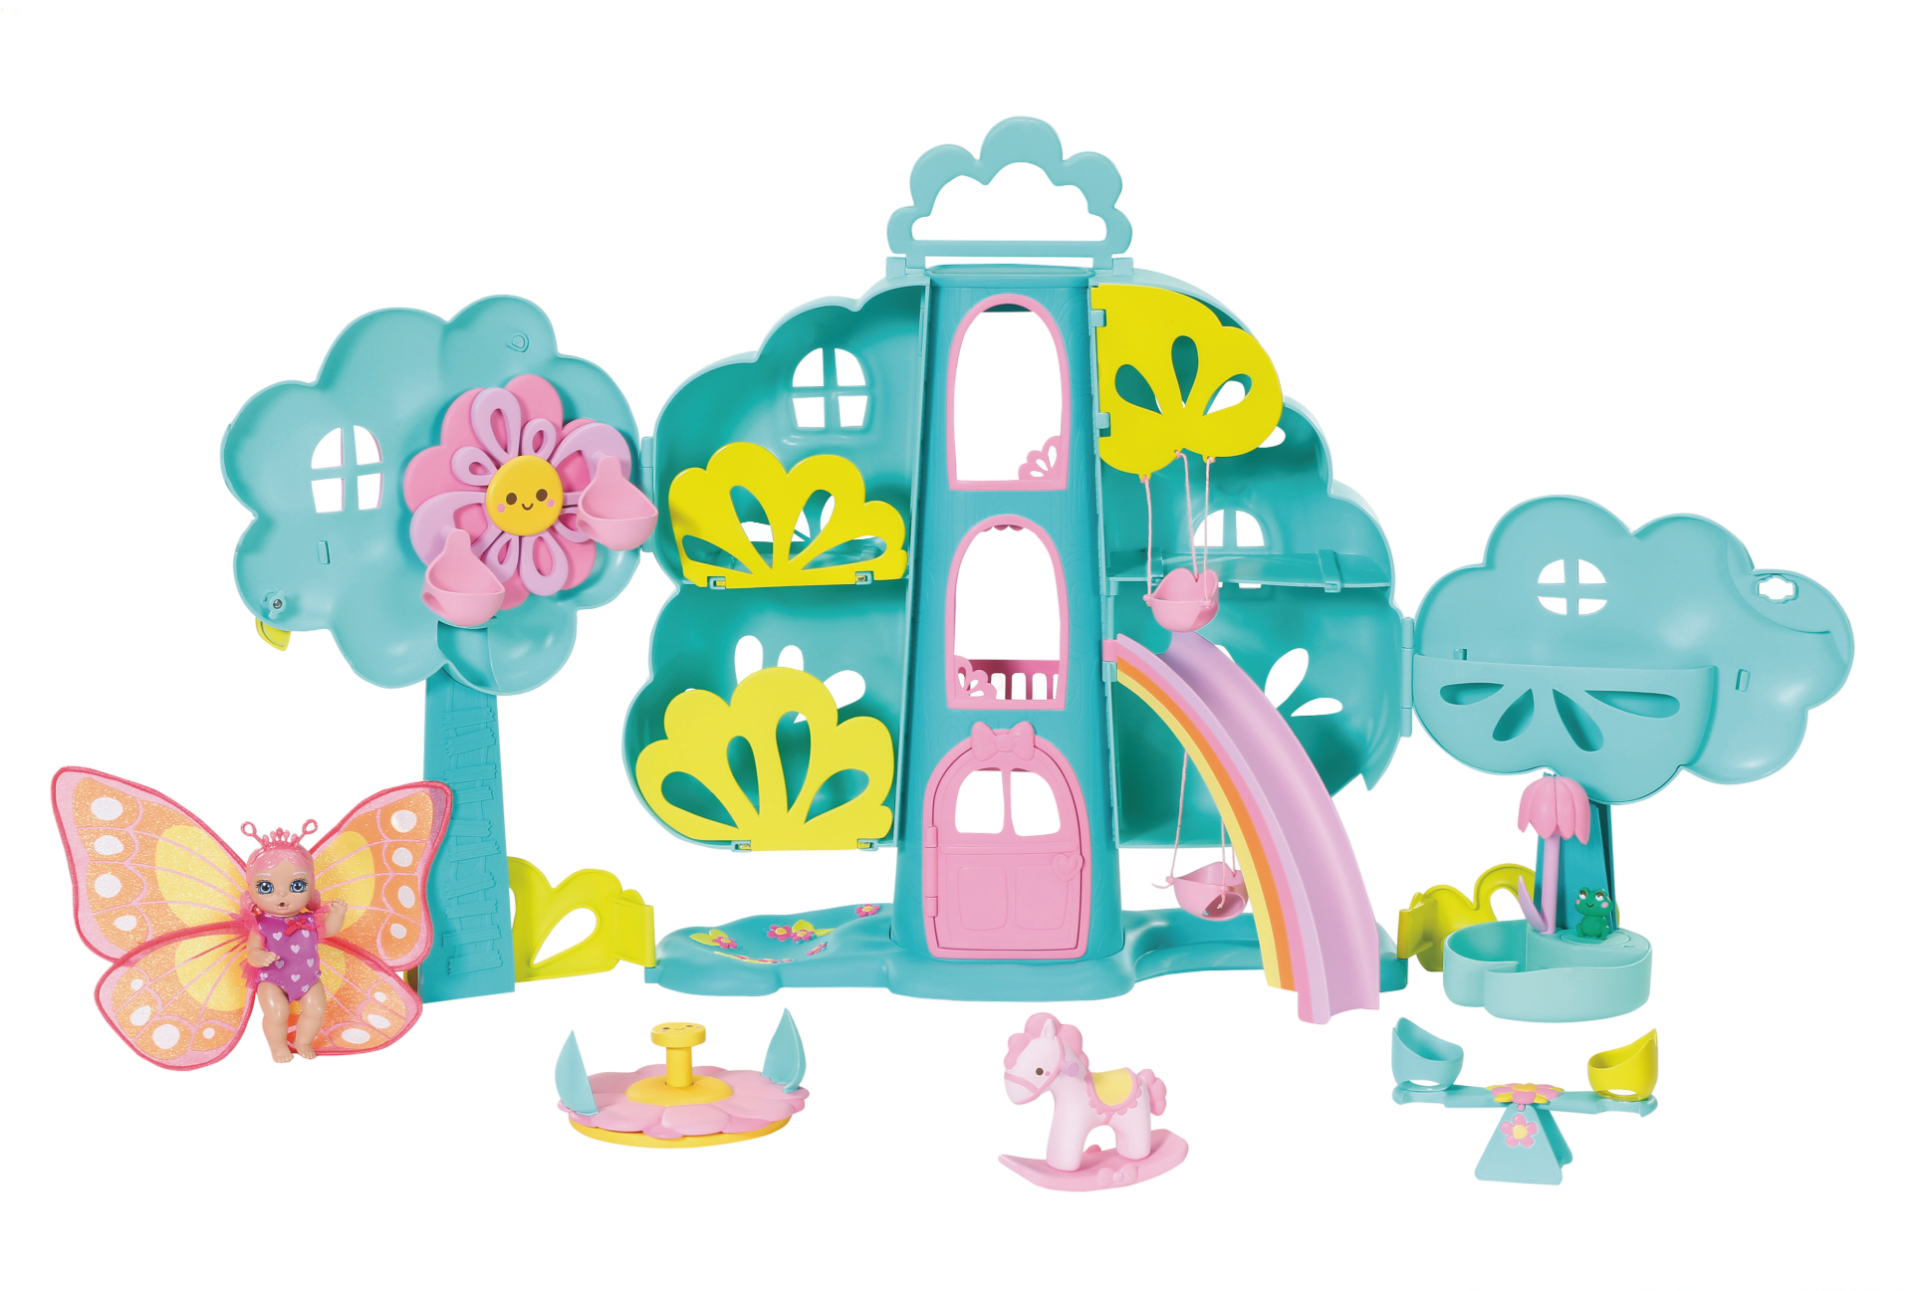 BABY BORN SURPRISE TREEHOUSE PLAYSET